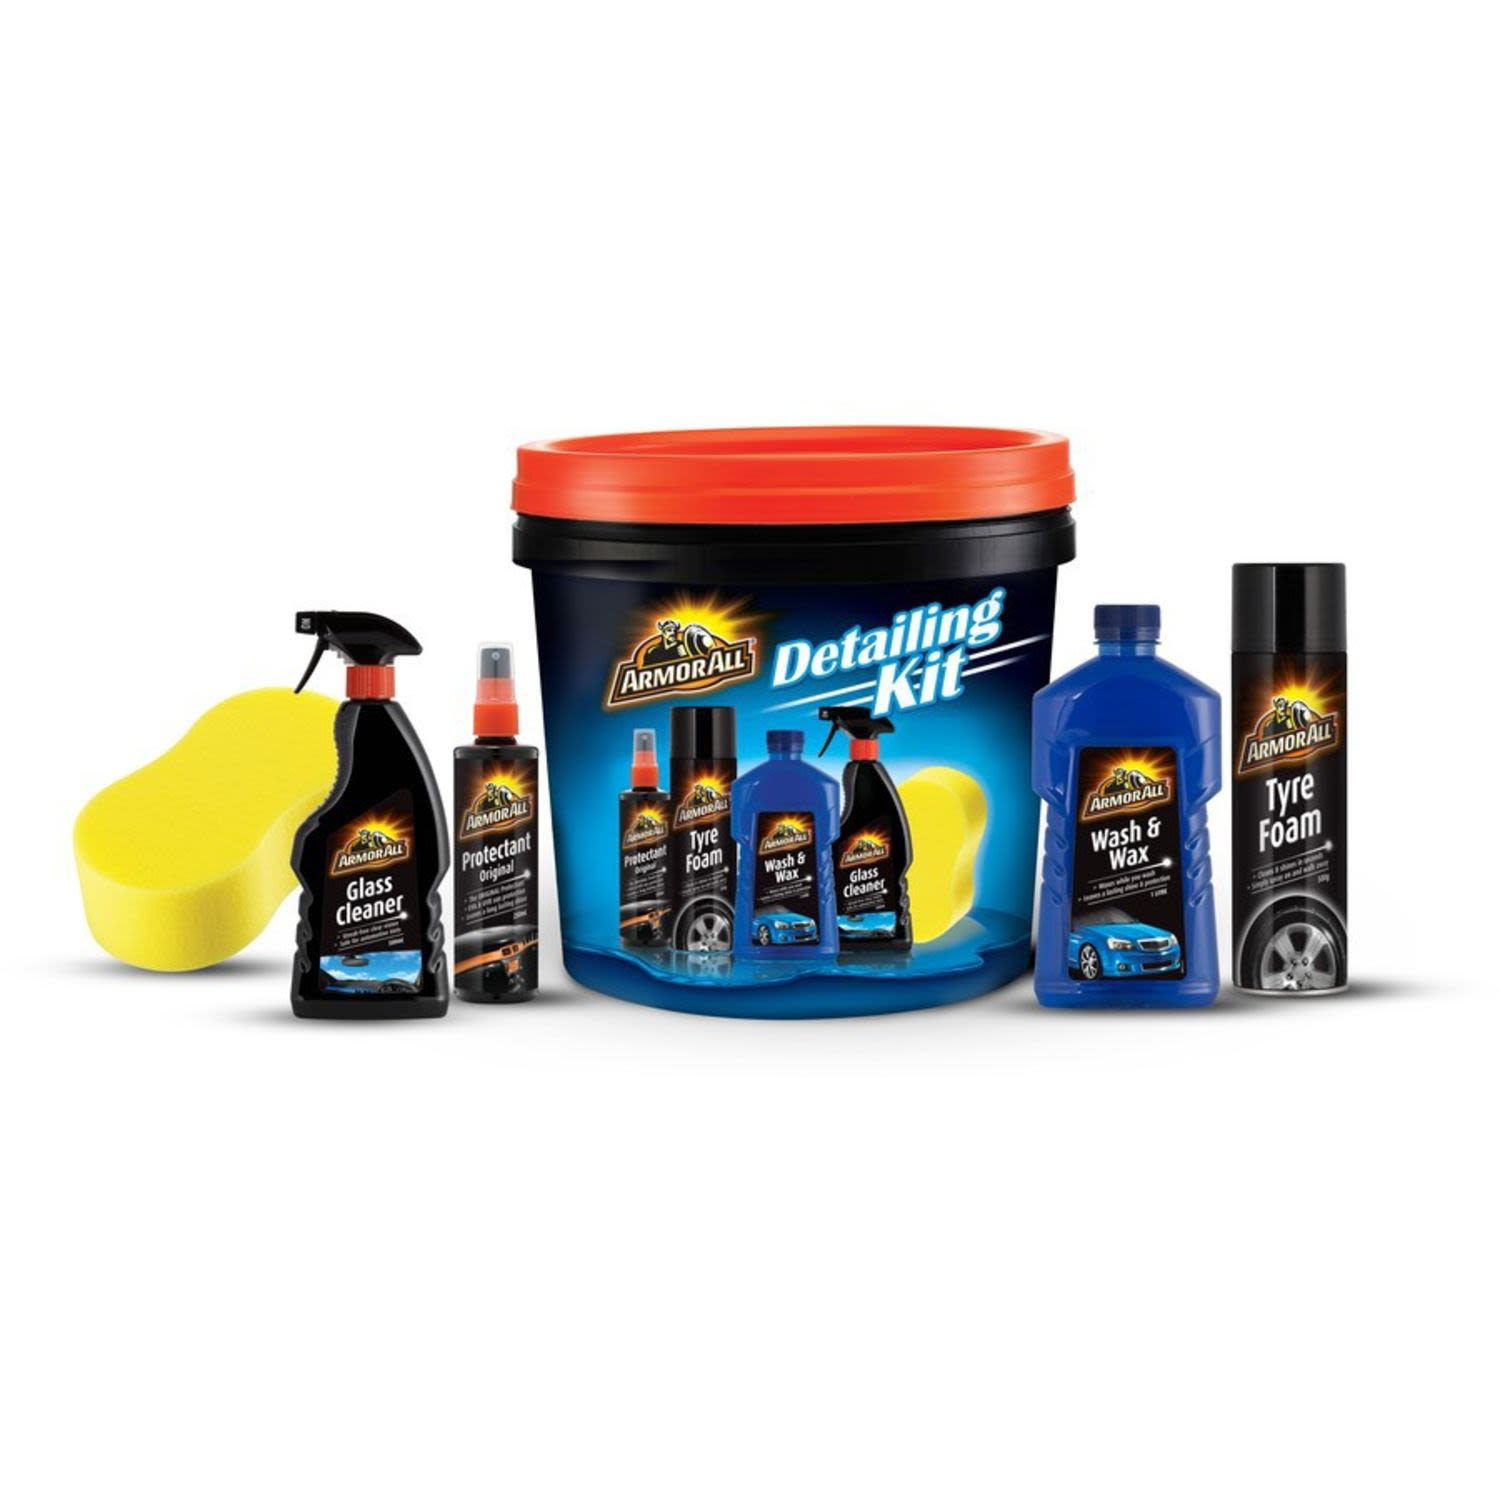 Armor All Clean & Protect Kit, 1 Each